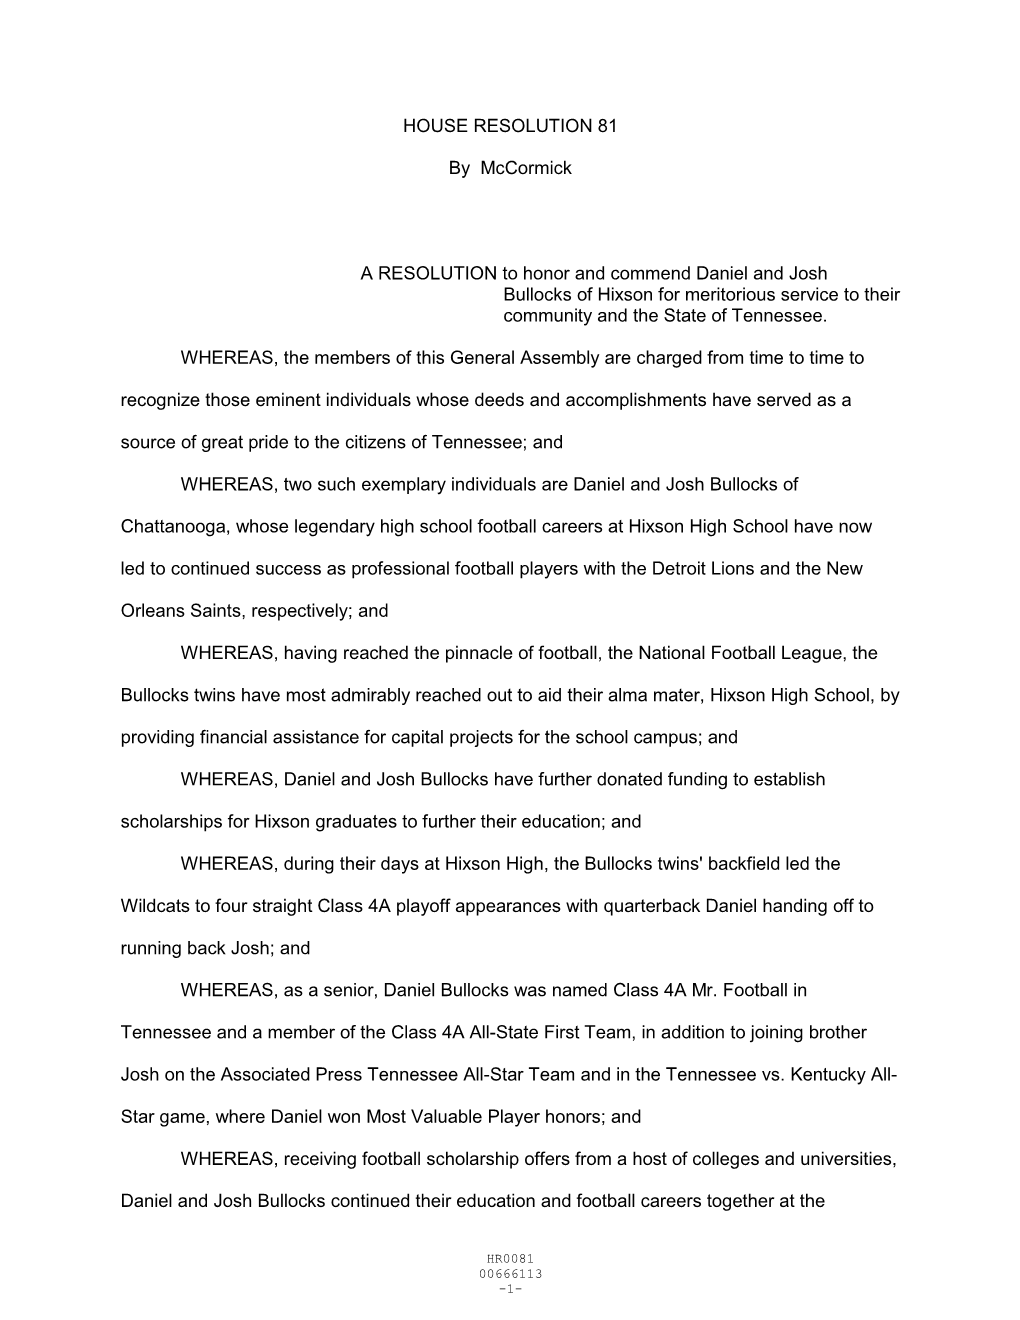 HOUSE RESOLUTION 81 by Mccormick a RESOLUTION To